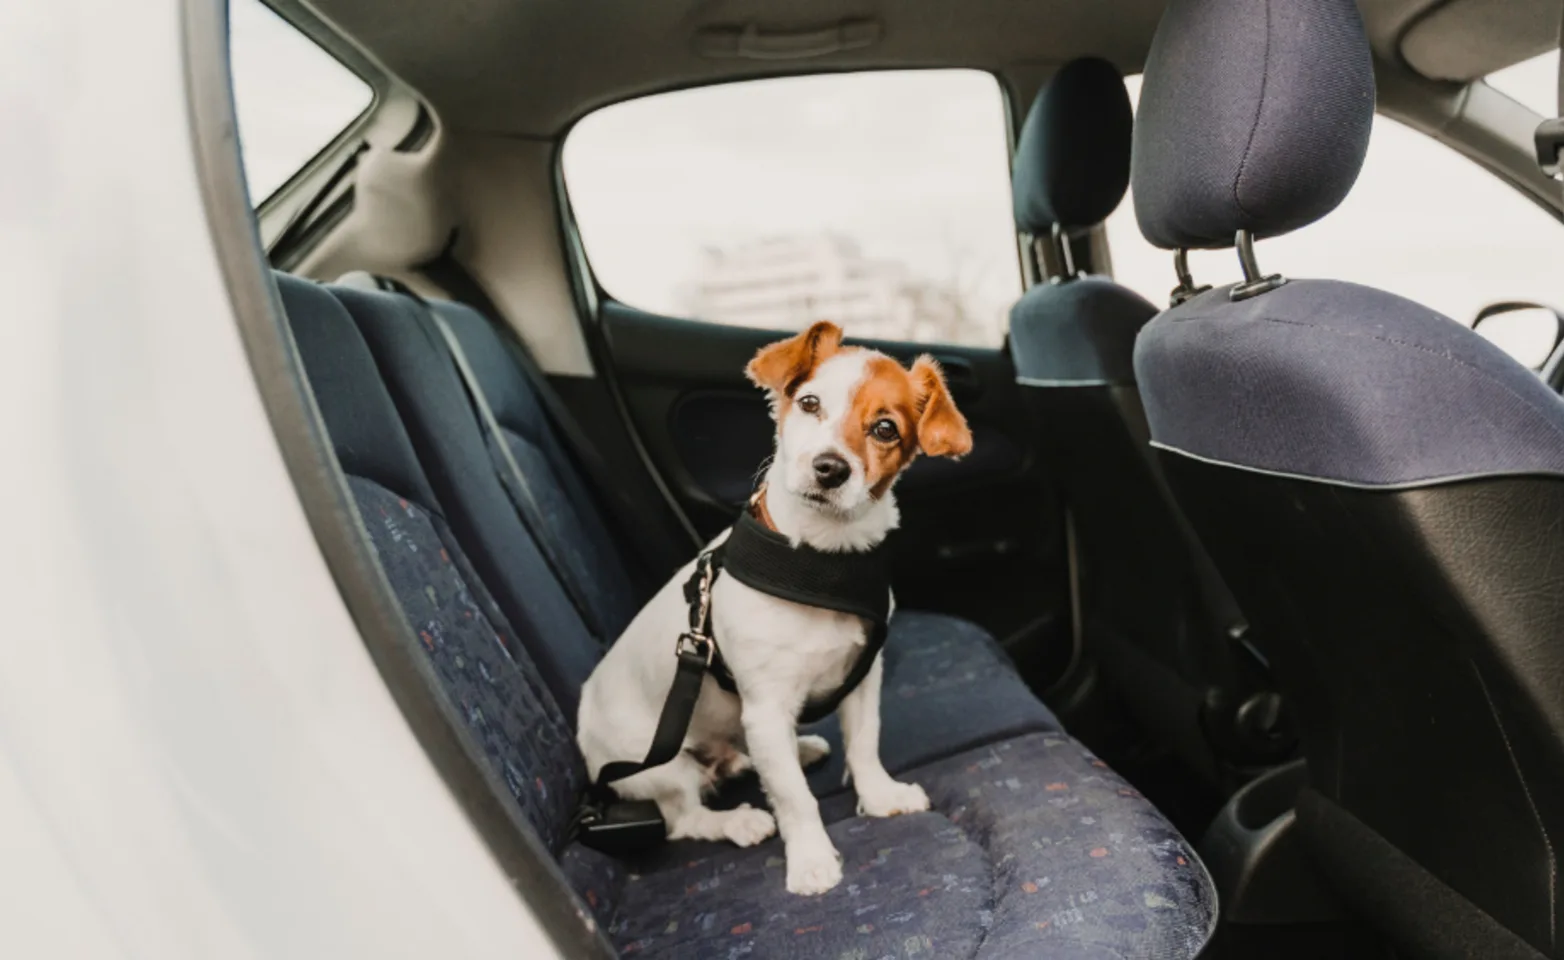 Small dog with dog harness sitting in a car